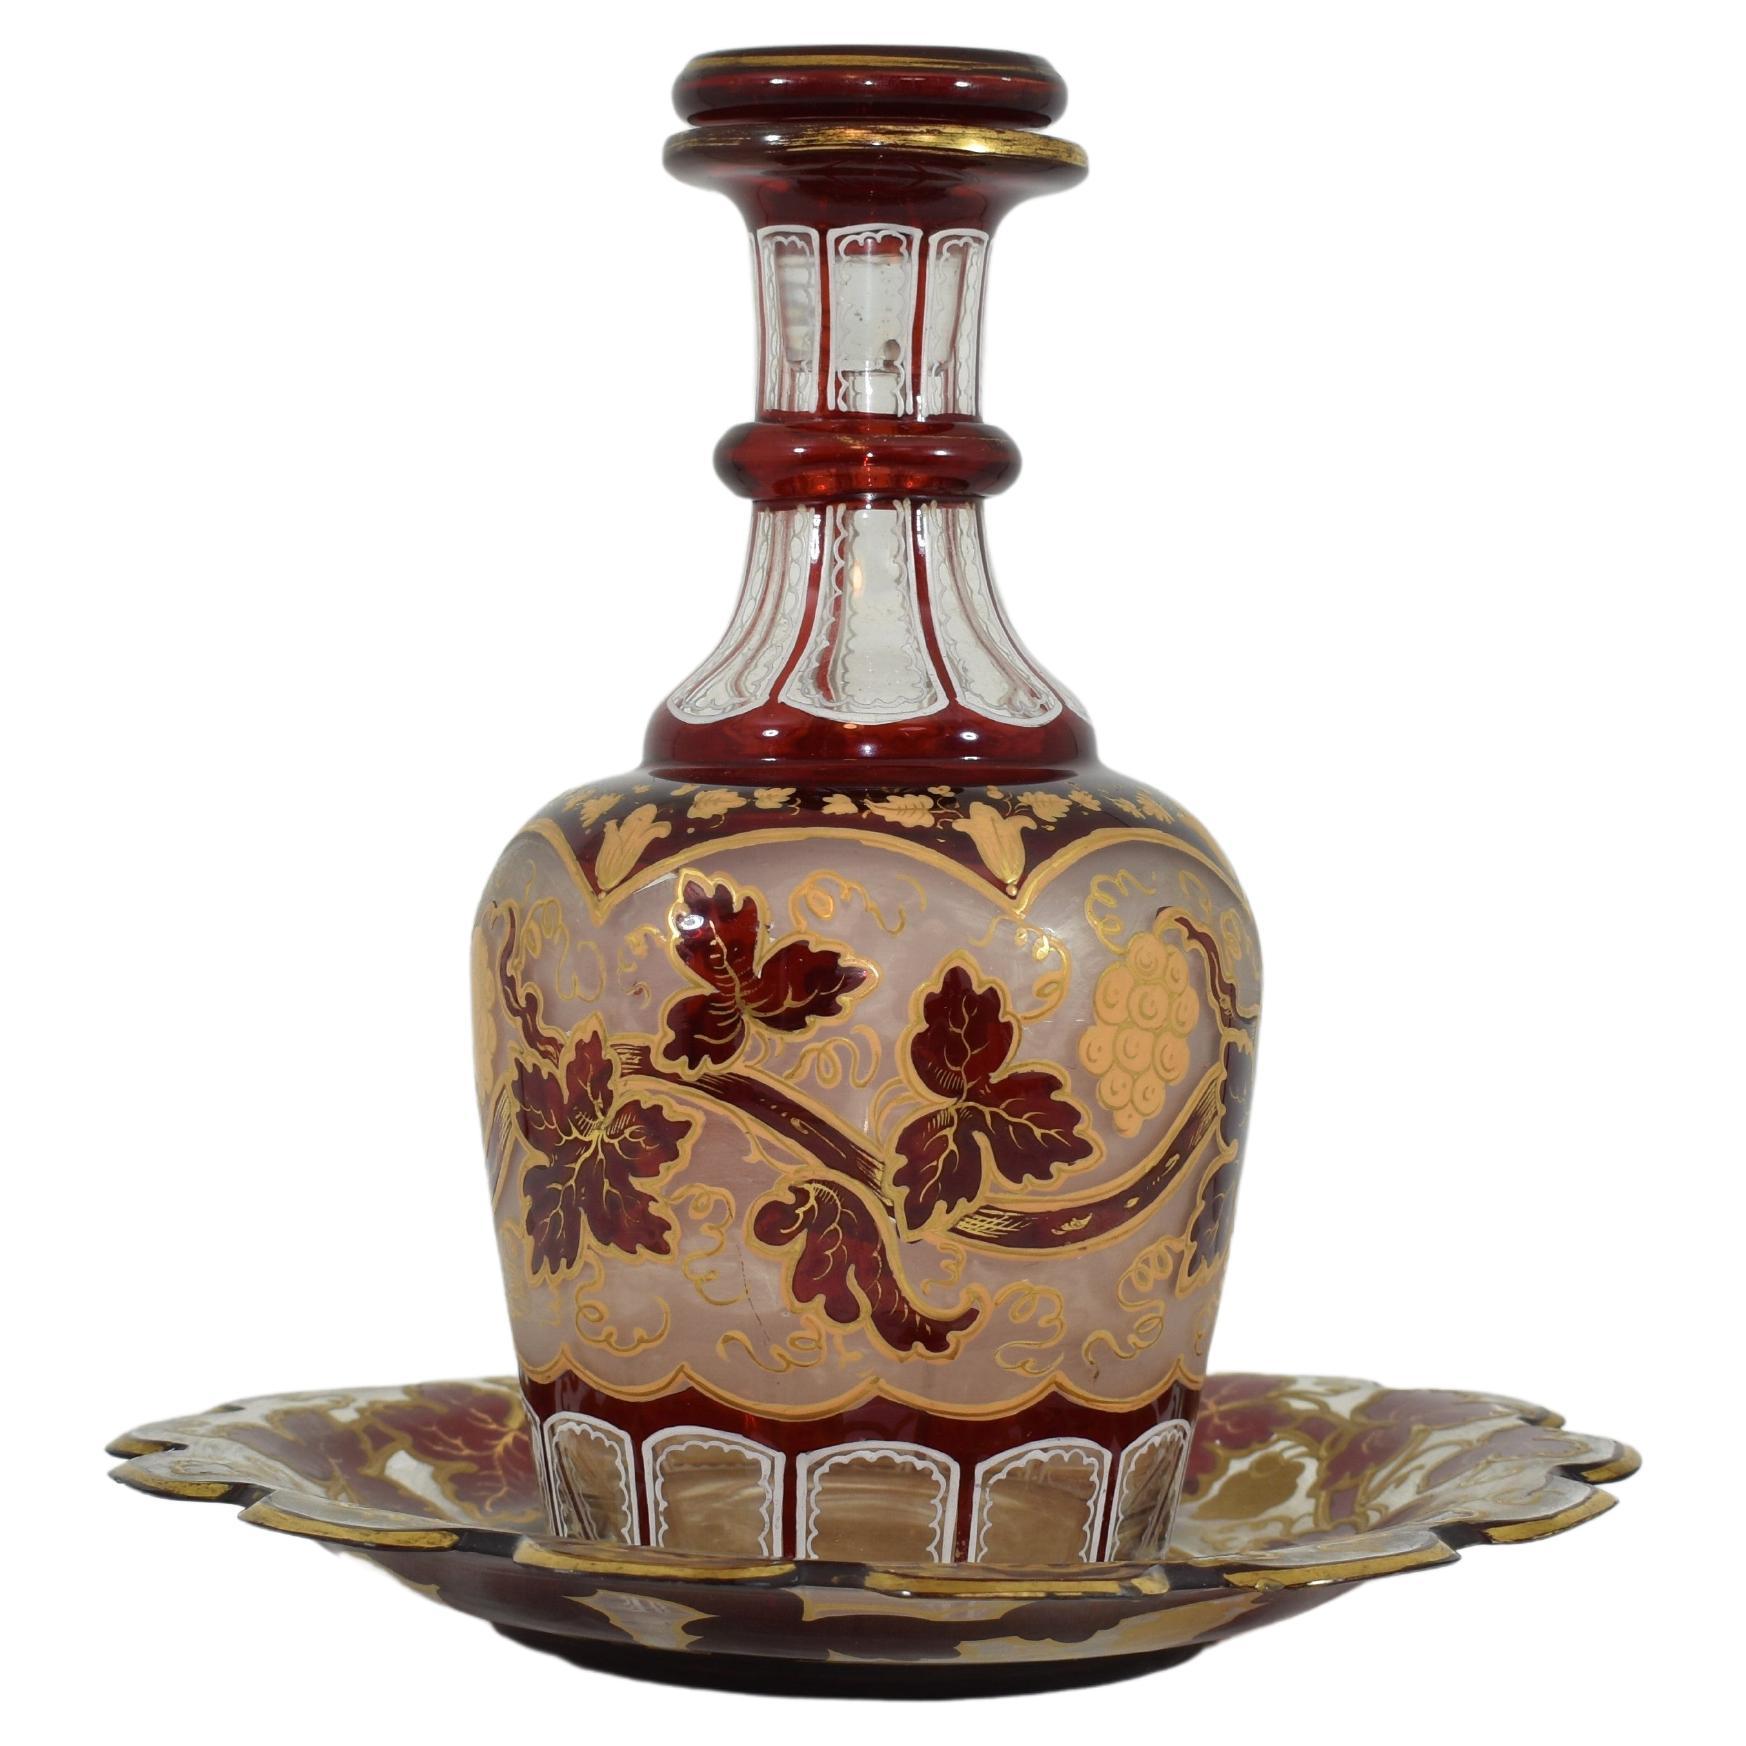 An exquisite bottle and stopper with matching plate made of ruby red and transparent blown glass, decorated all around with multiple shapes and patterns, white enamel decoration on the base and neck of the bottle, the circular body is profusely